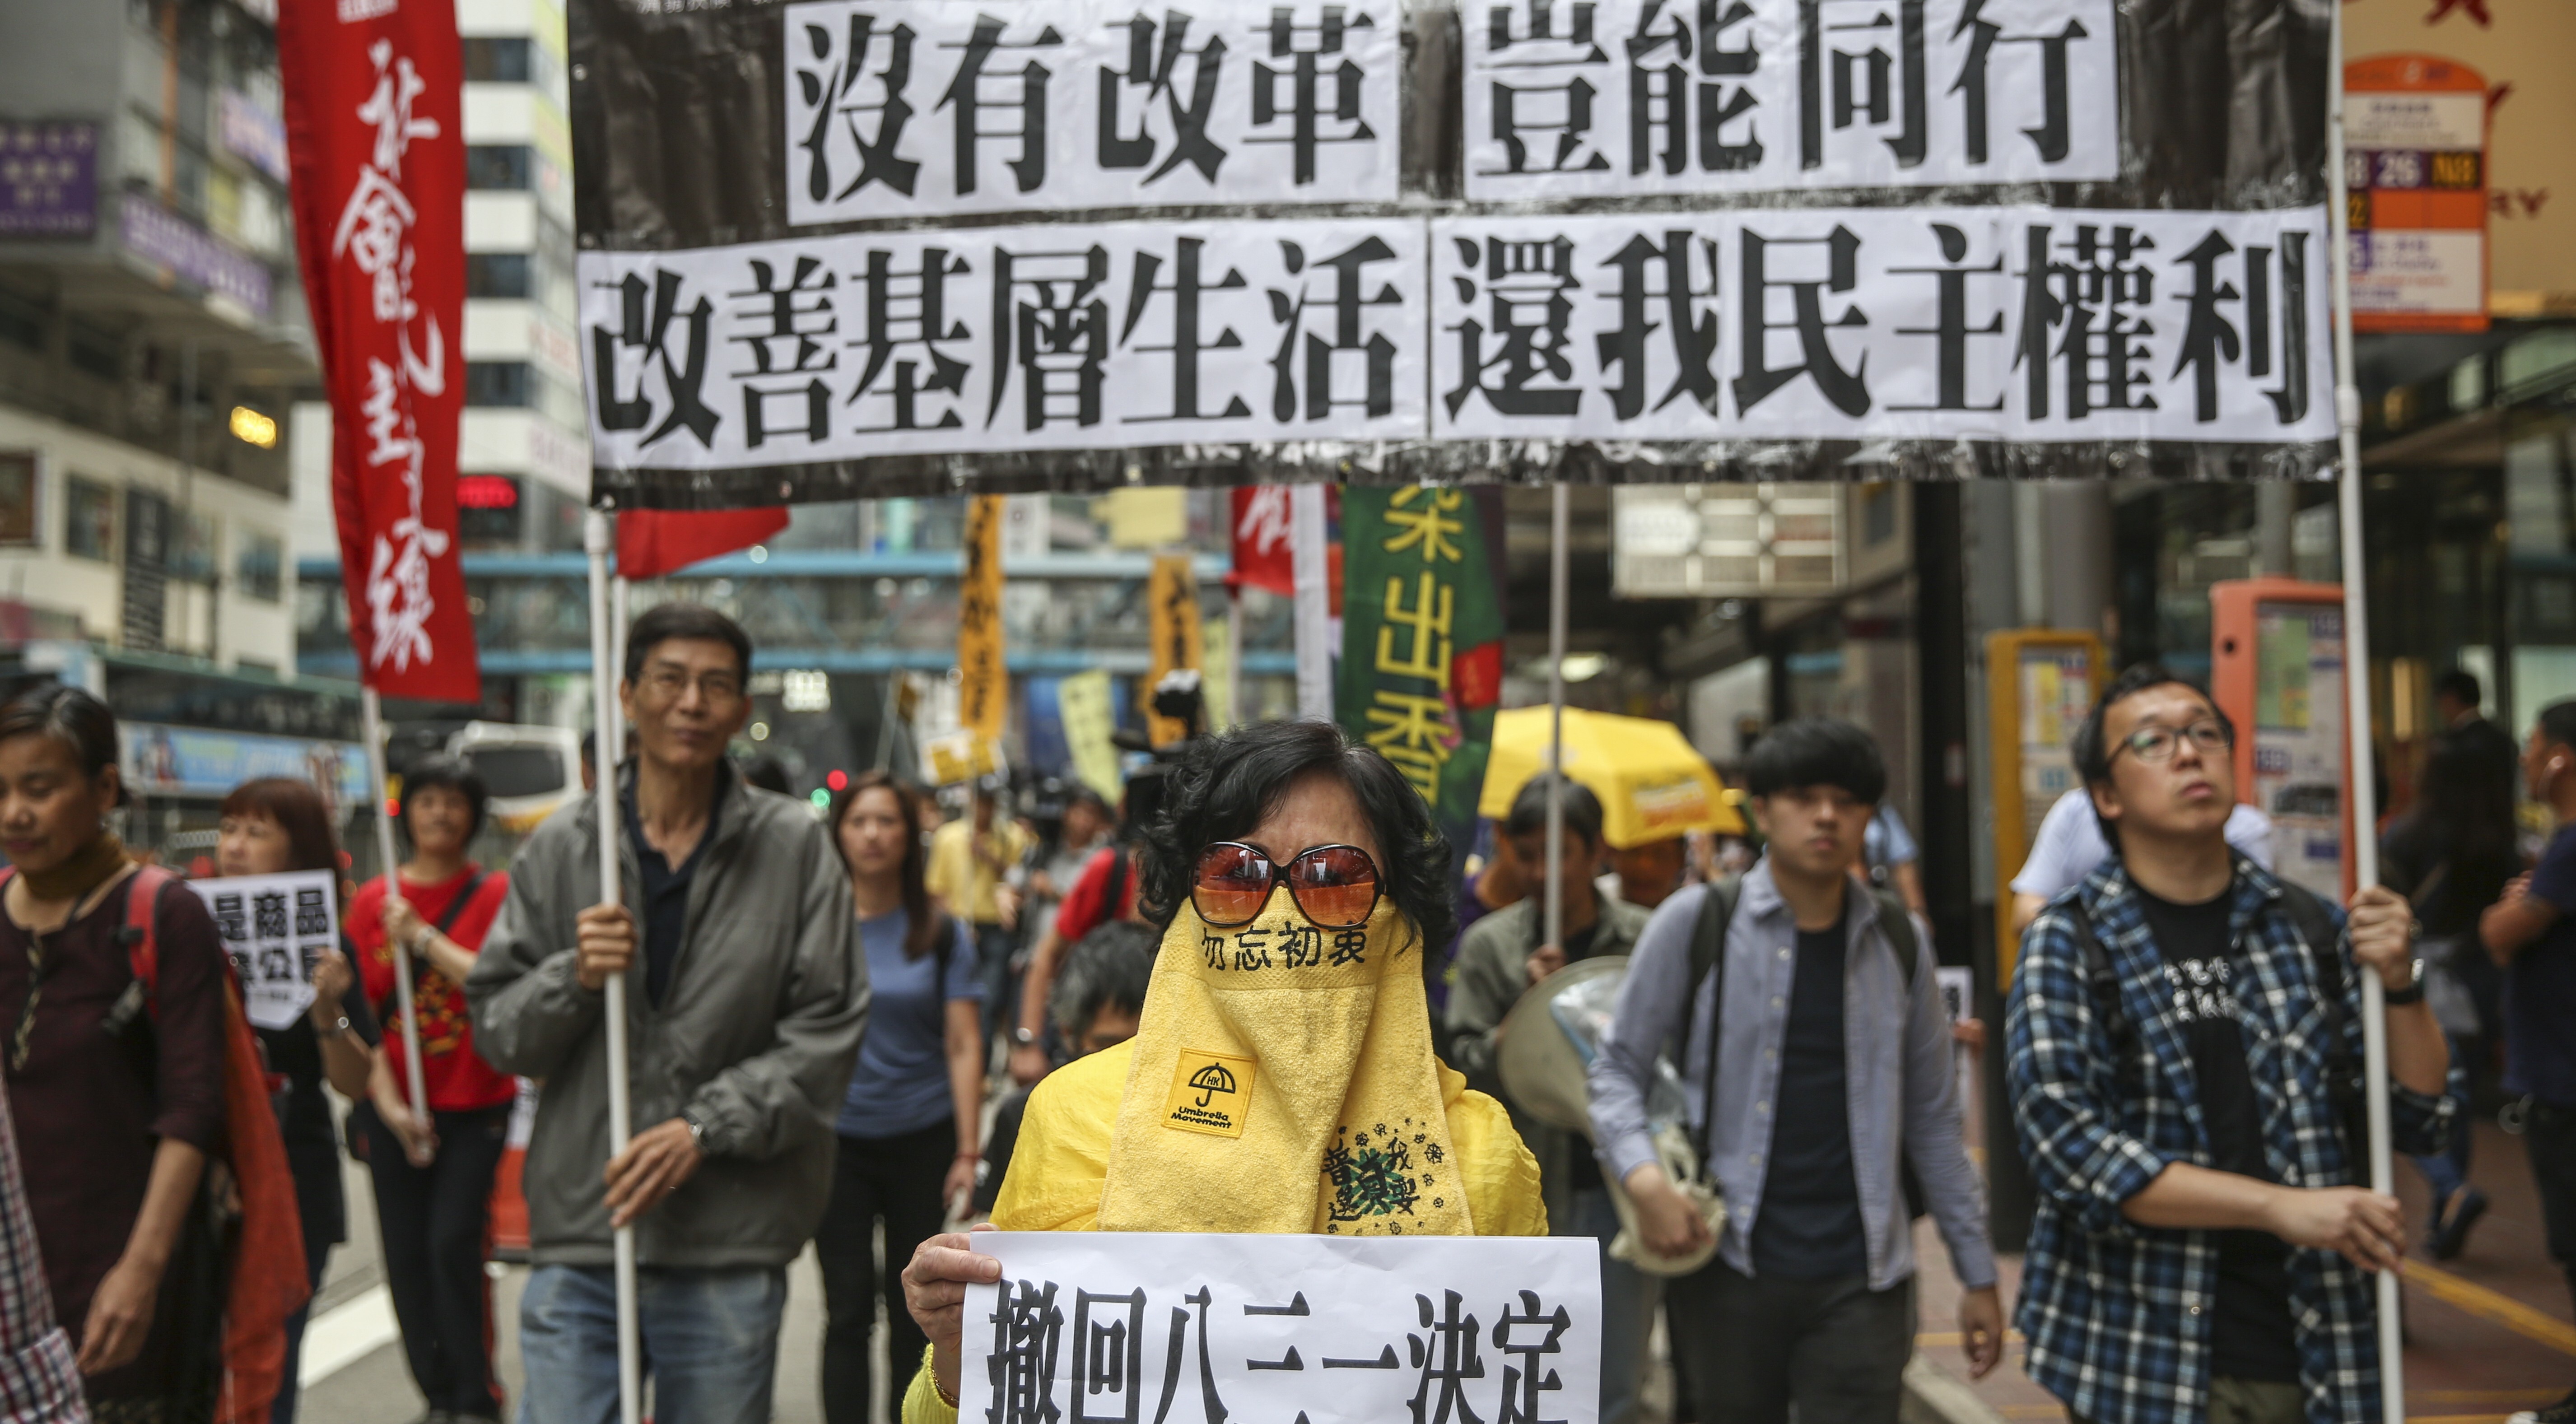 Over 200 people march from Causeway Bay to Carrie Lam’s office on April 23, 2017, to protest against her “small-circle” election as chief executive by a 1,200-member Election Committee. Photo: Sam Tsang